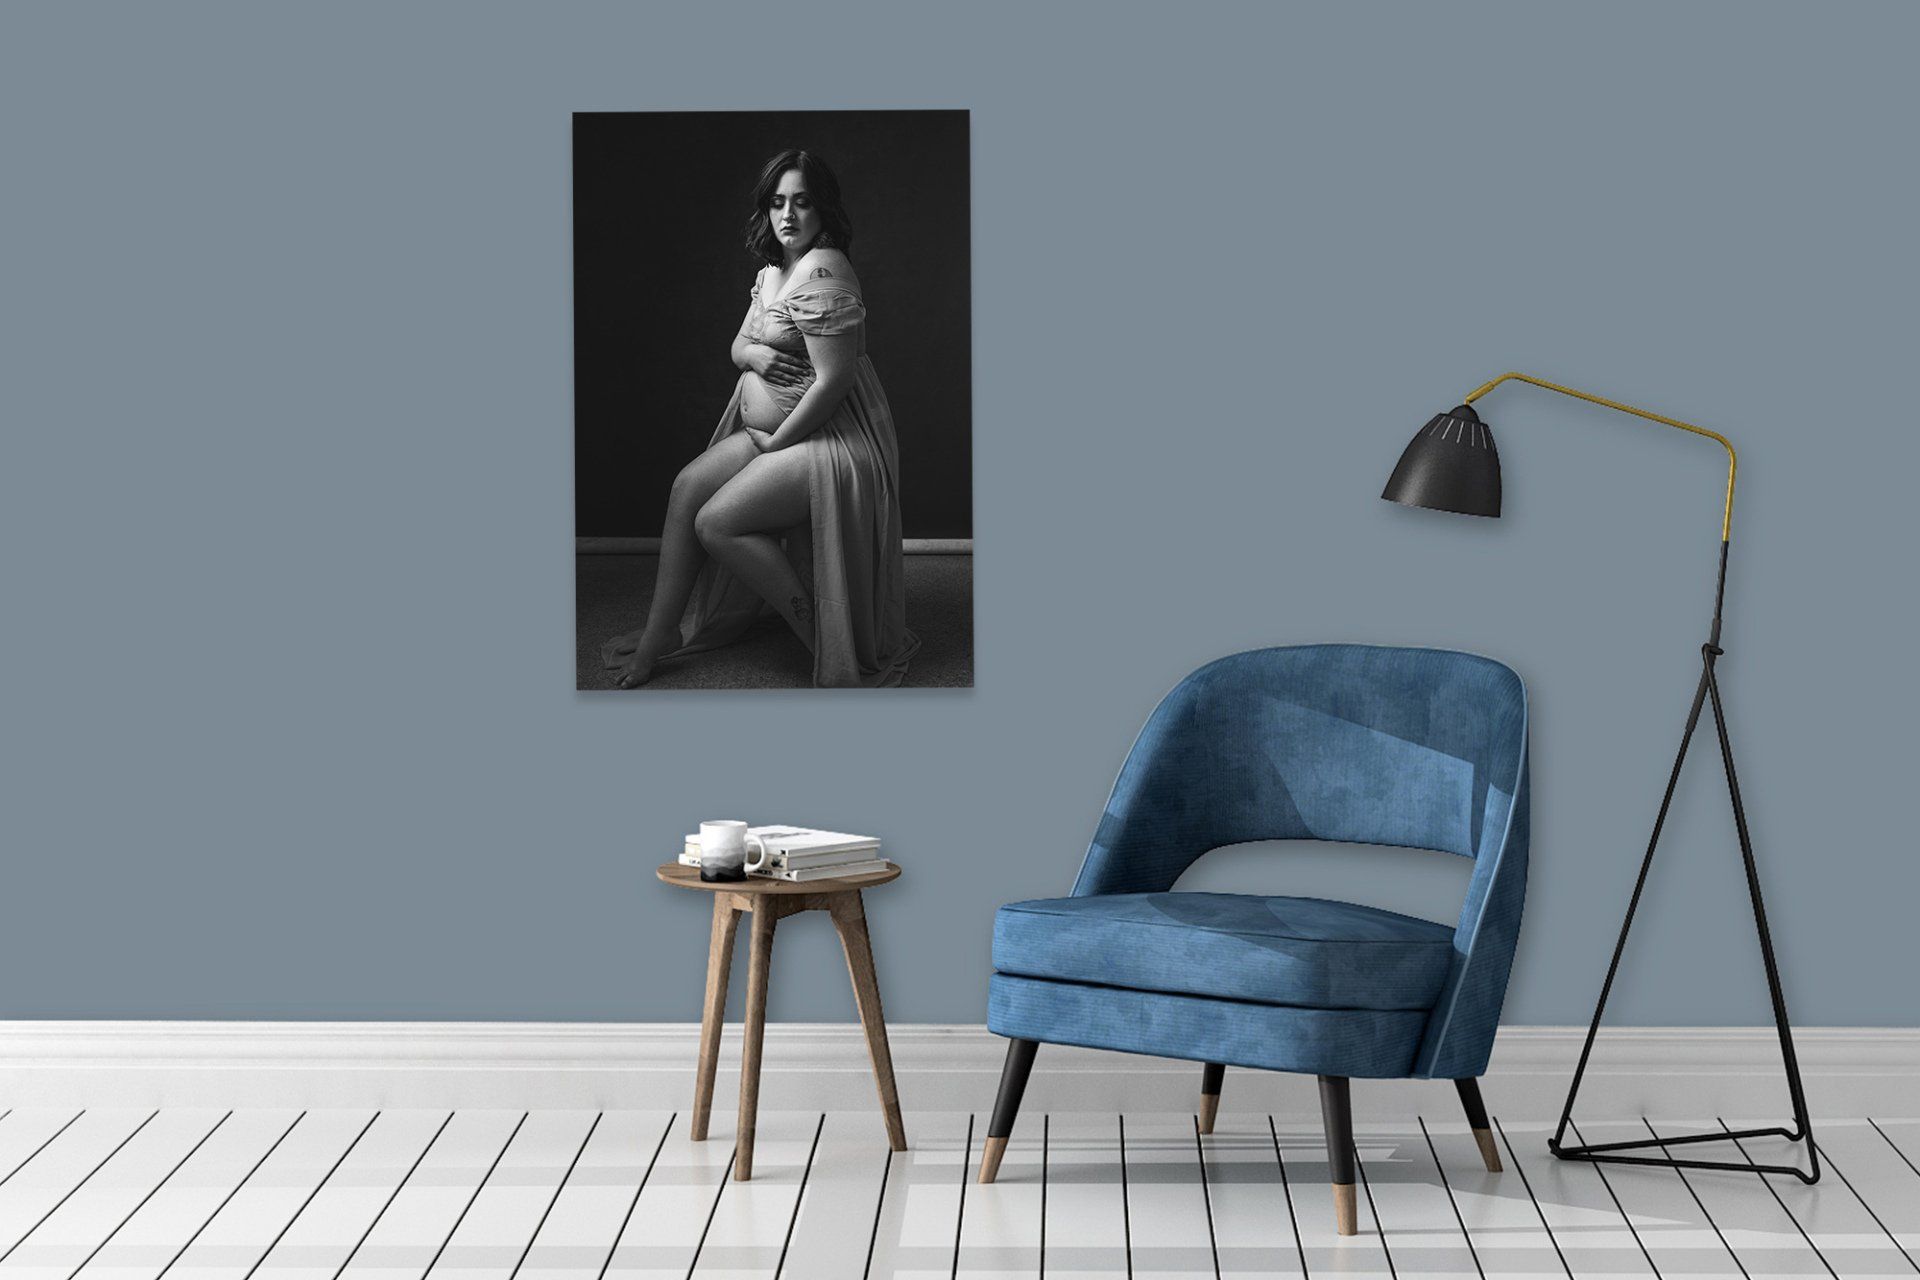 A blue chair in front of a wall with a painting.